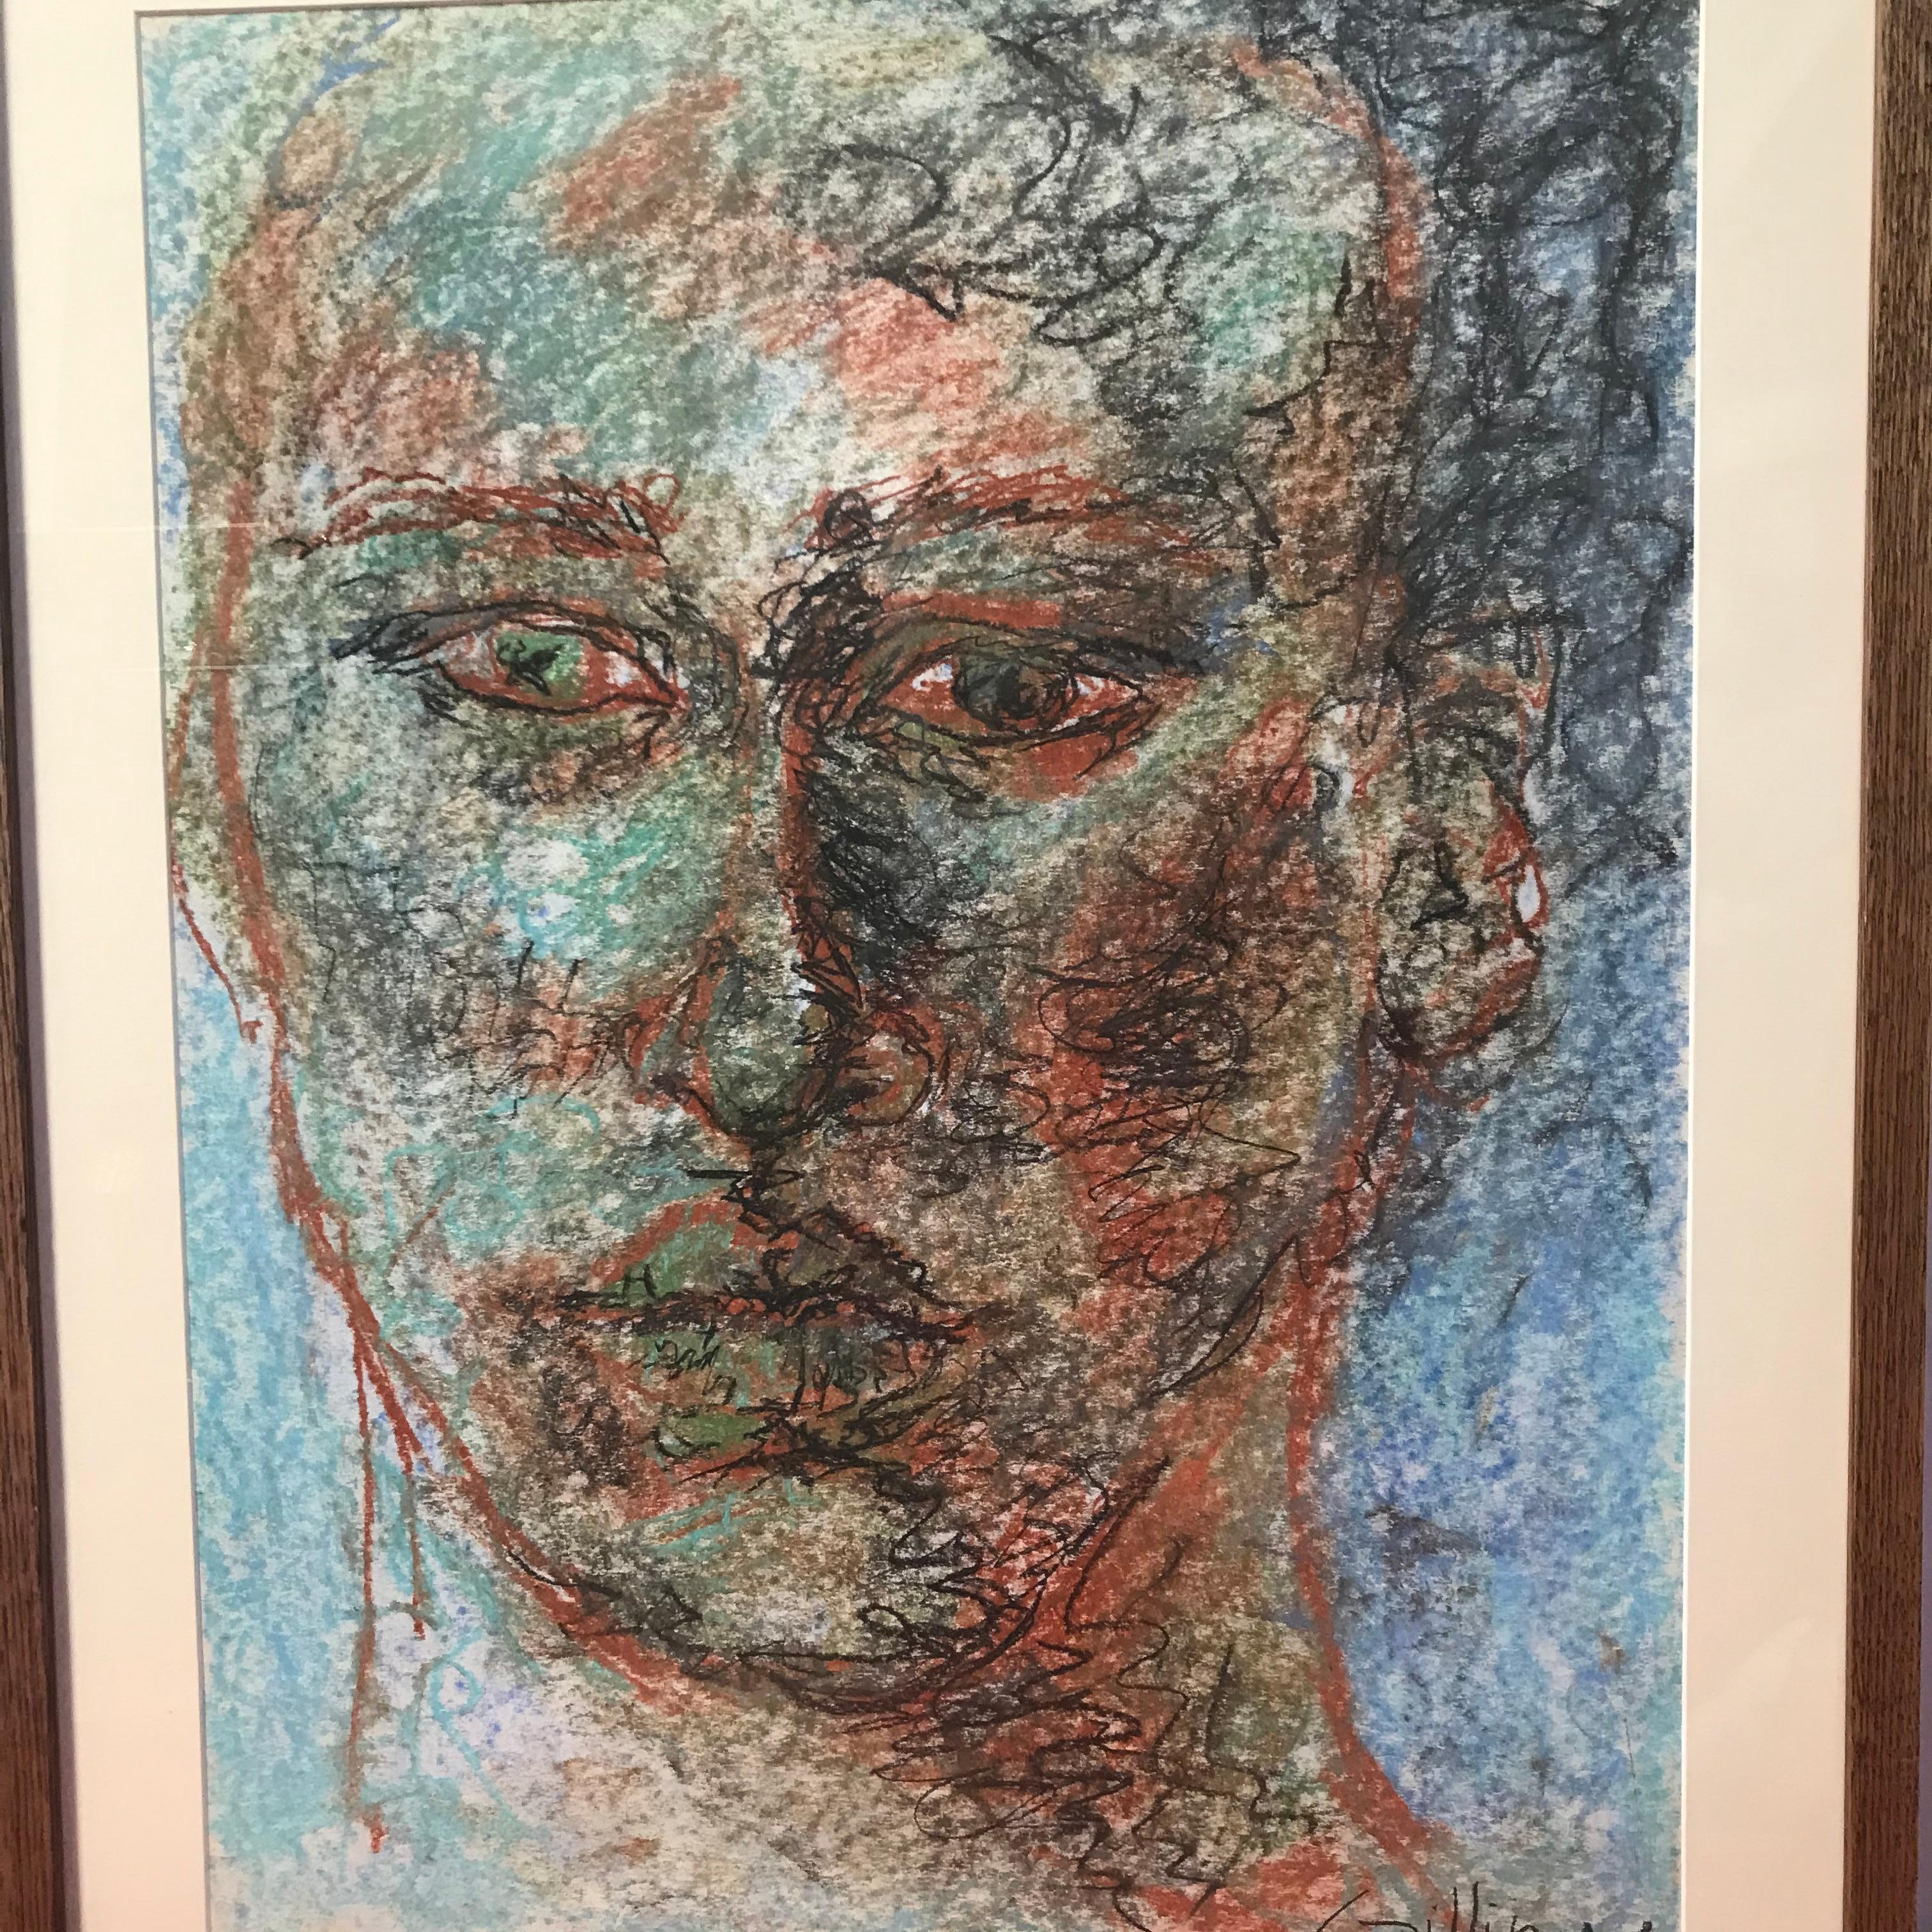 The artwork features a portrait of a woman made with various colored pencils. It is signed by the artist Gillian Lefkowitz. The artist gives like always in her portraitures a strong expression to her subject, and through the intensity of their gaze